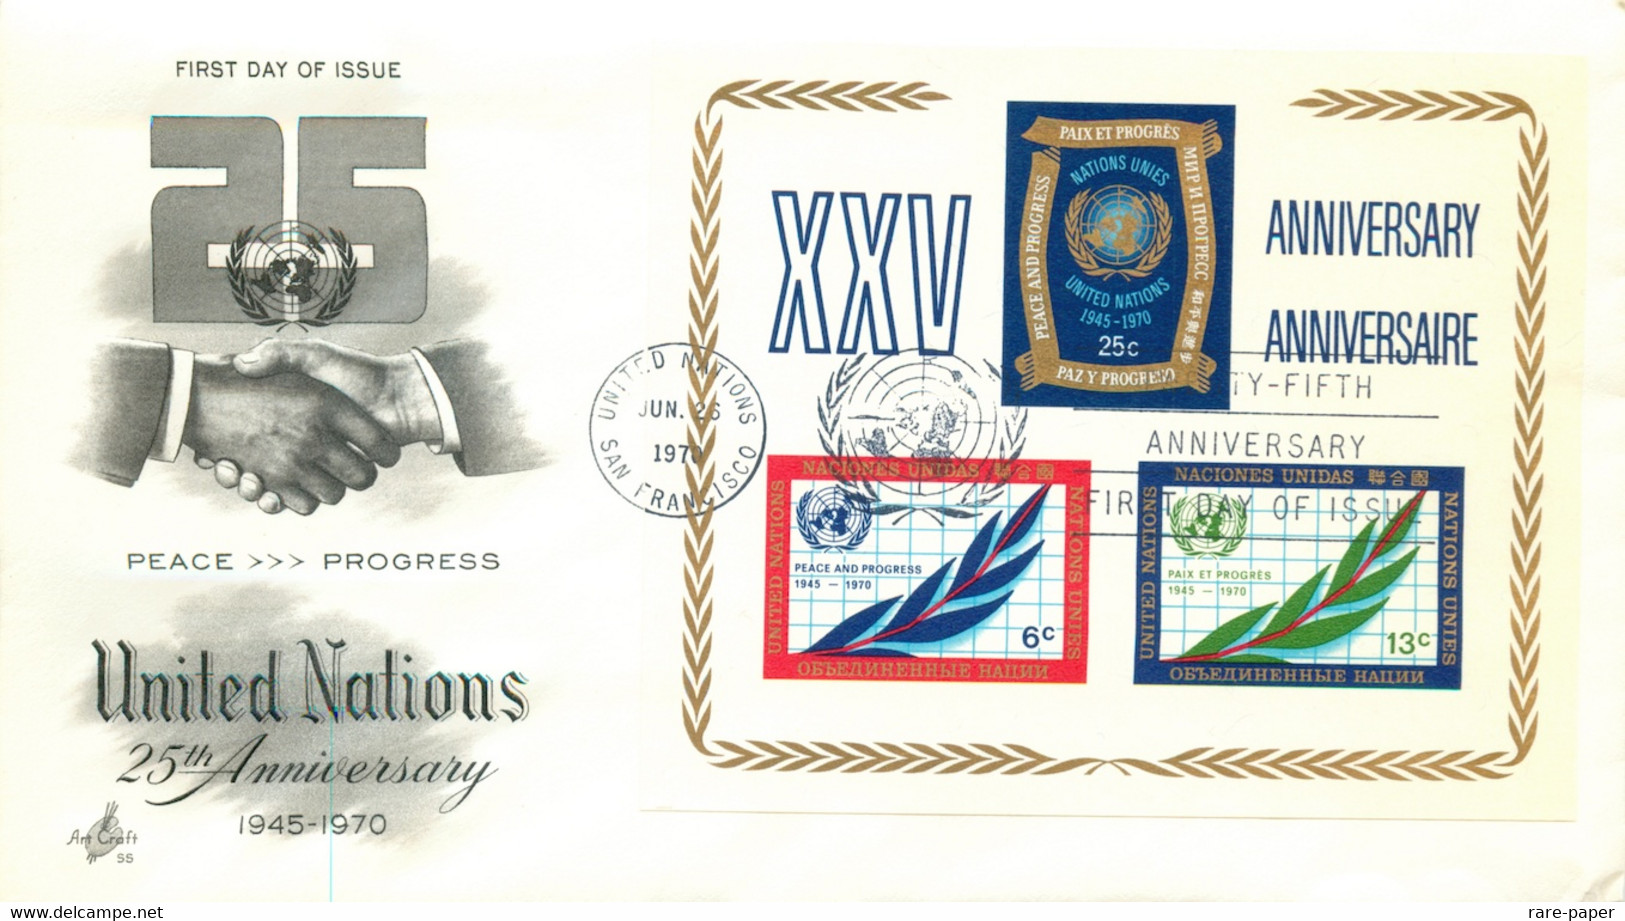 32 x First Day Covers 1969-1971, United Nations, USA United States Envelopes